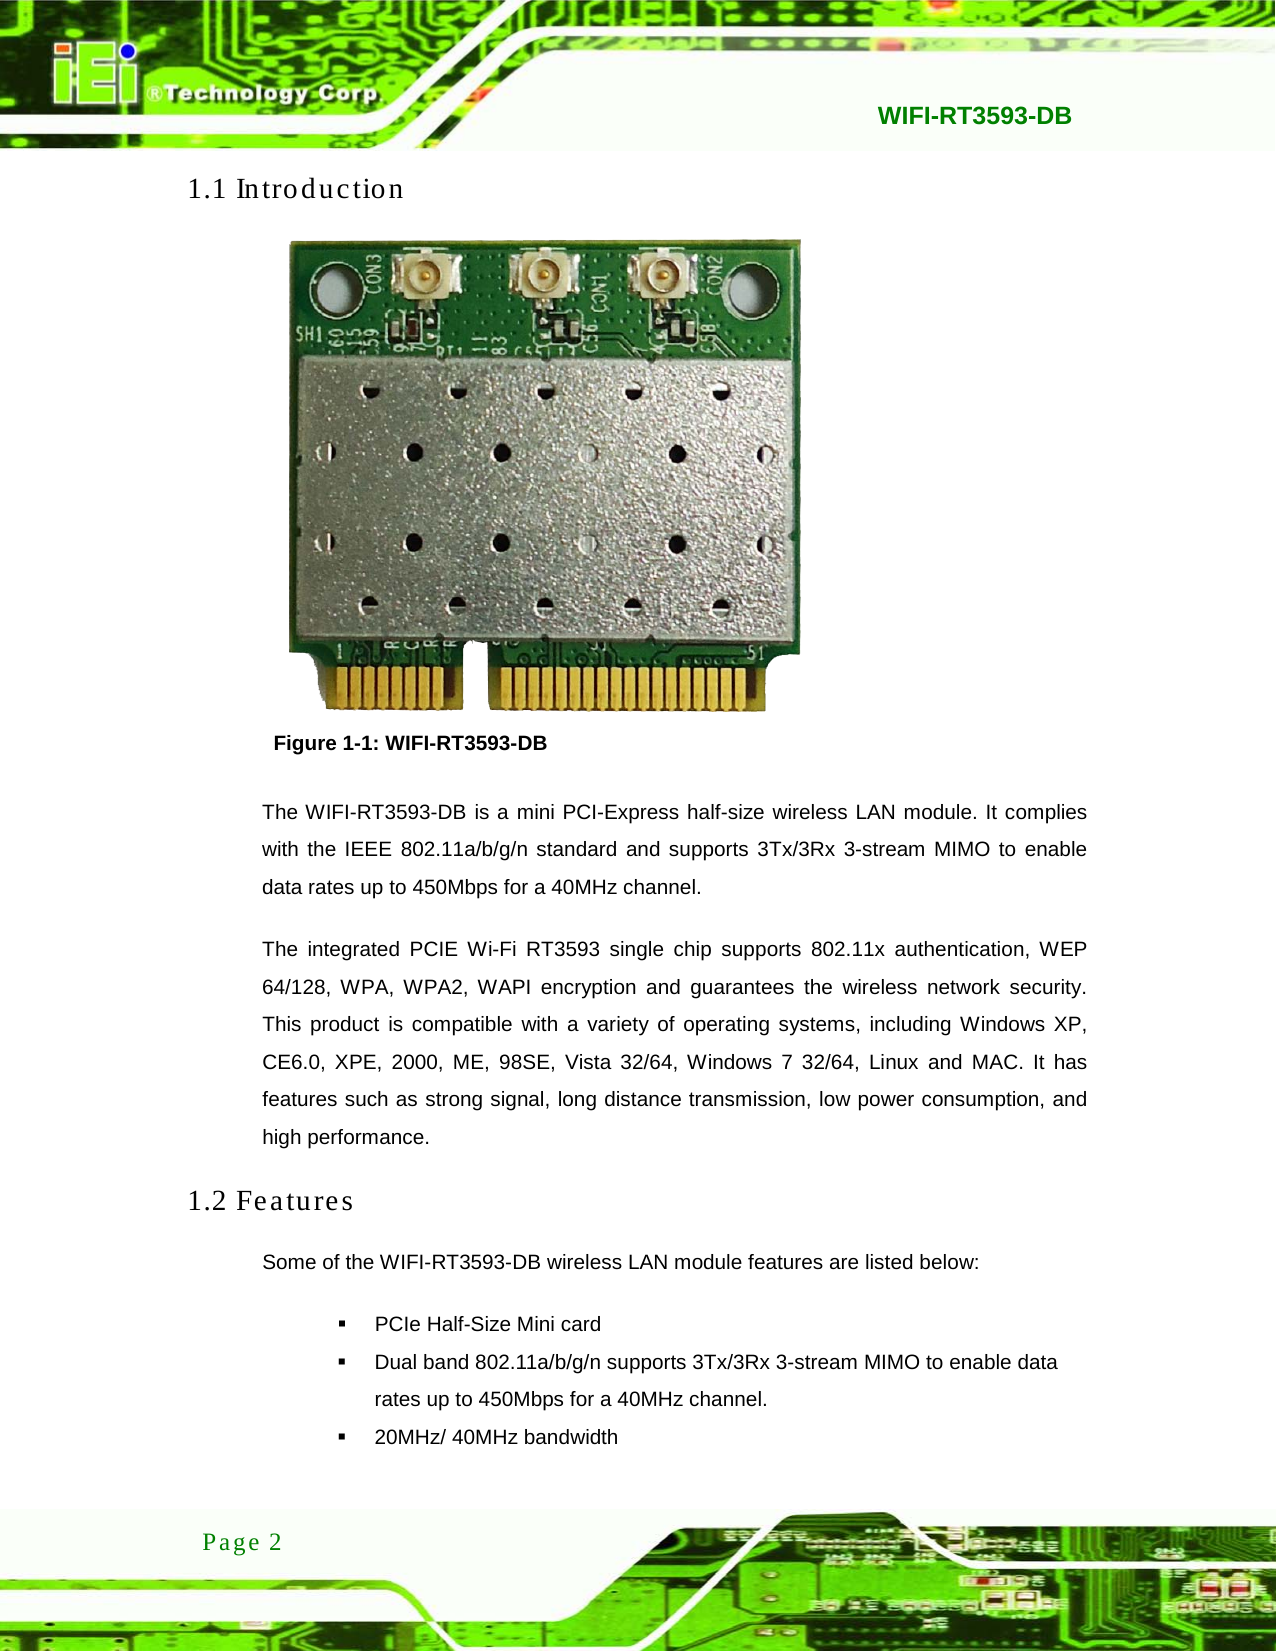   WIFI-RT3593-DB  Page 2 1.1 Introduction  Figure 1-1: WIFI-RT3593-DB The WIFI-RT3593-DB is a mini PCI-Express half-size wireless LAN module. It complies with the IEEE 802.11a/b/g/n standard and supports 3Tx/3Rx 3-stream MIMO to enable data rates up to 450Mbps for a 40MHz channel.   The integrated PCIE Wi-Fi RT3593 single chip supports 802.11x authentication, WEP 64/128, WPA, WPA2, WAPI encryption and  guarantees  the  wireless network security. This product is compatible with a variety of operating systems, including Windows XP, CE6.0, XPE, 2000, ME, 98SE, Vista 32/64, Windows 7 32/64, Linux and MAC.  It  has features such as strong signal, long distance transmission, low power consumption, and high performance. 1.2 Features Some of the WIFI-RT3593-DB wireless LAN module features are listed below:  PCIe Half-Size Mini card  Dual band 802.11a/b/g/n supports 3Tx/3Rx 3-stream MIMO to enable data rates up to 450Mbps for a 40MHz channel.  20MHz/ 40MHz bandwidth 